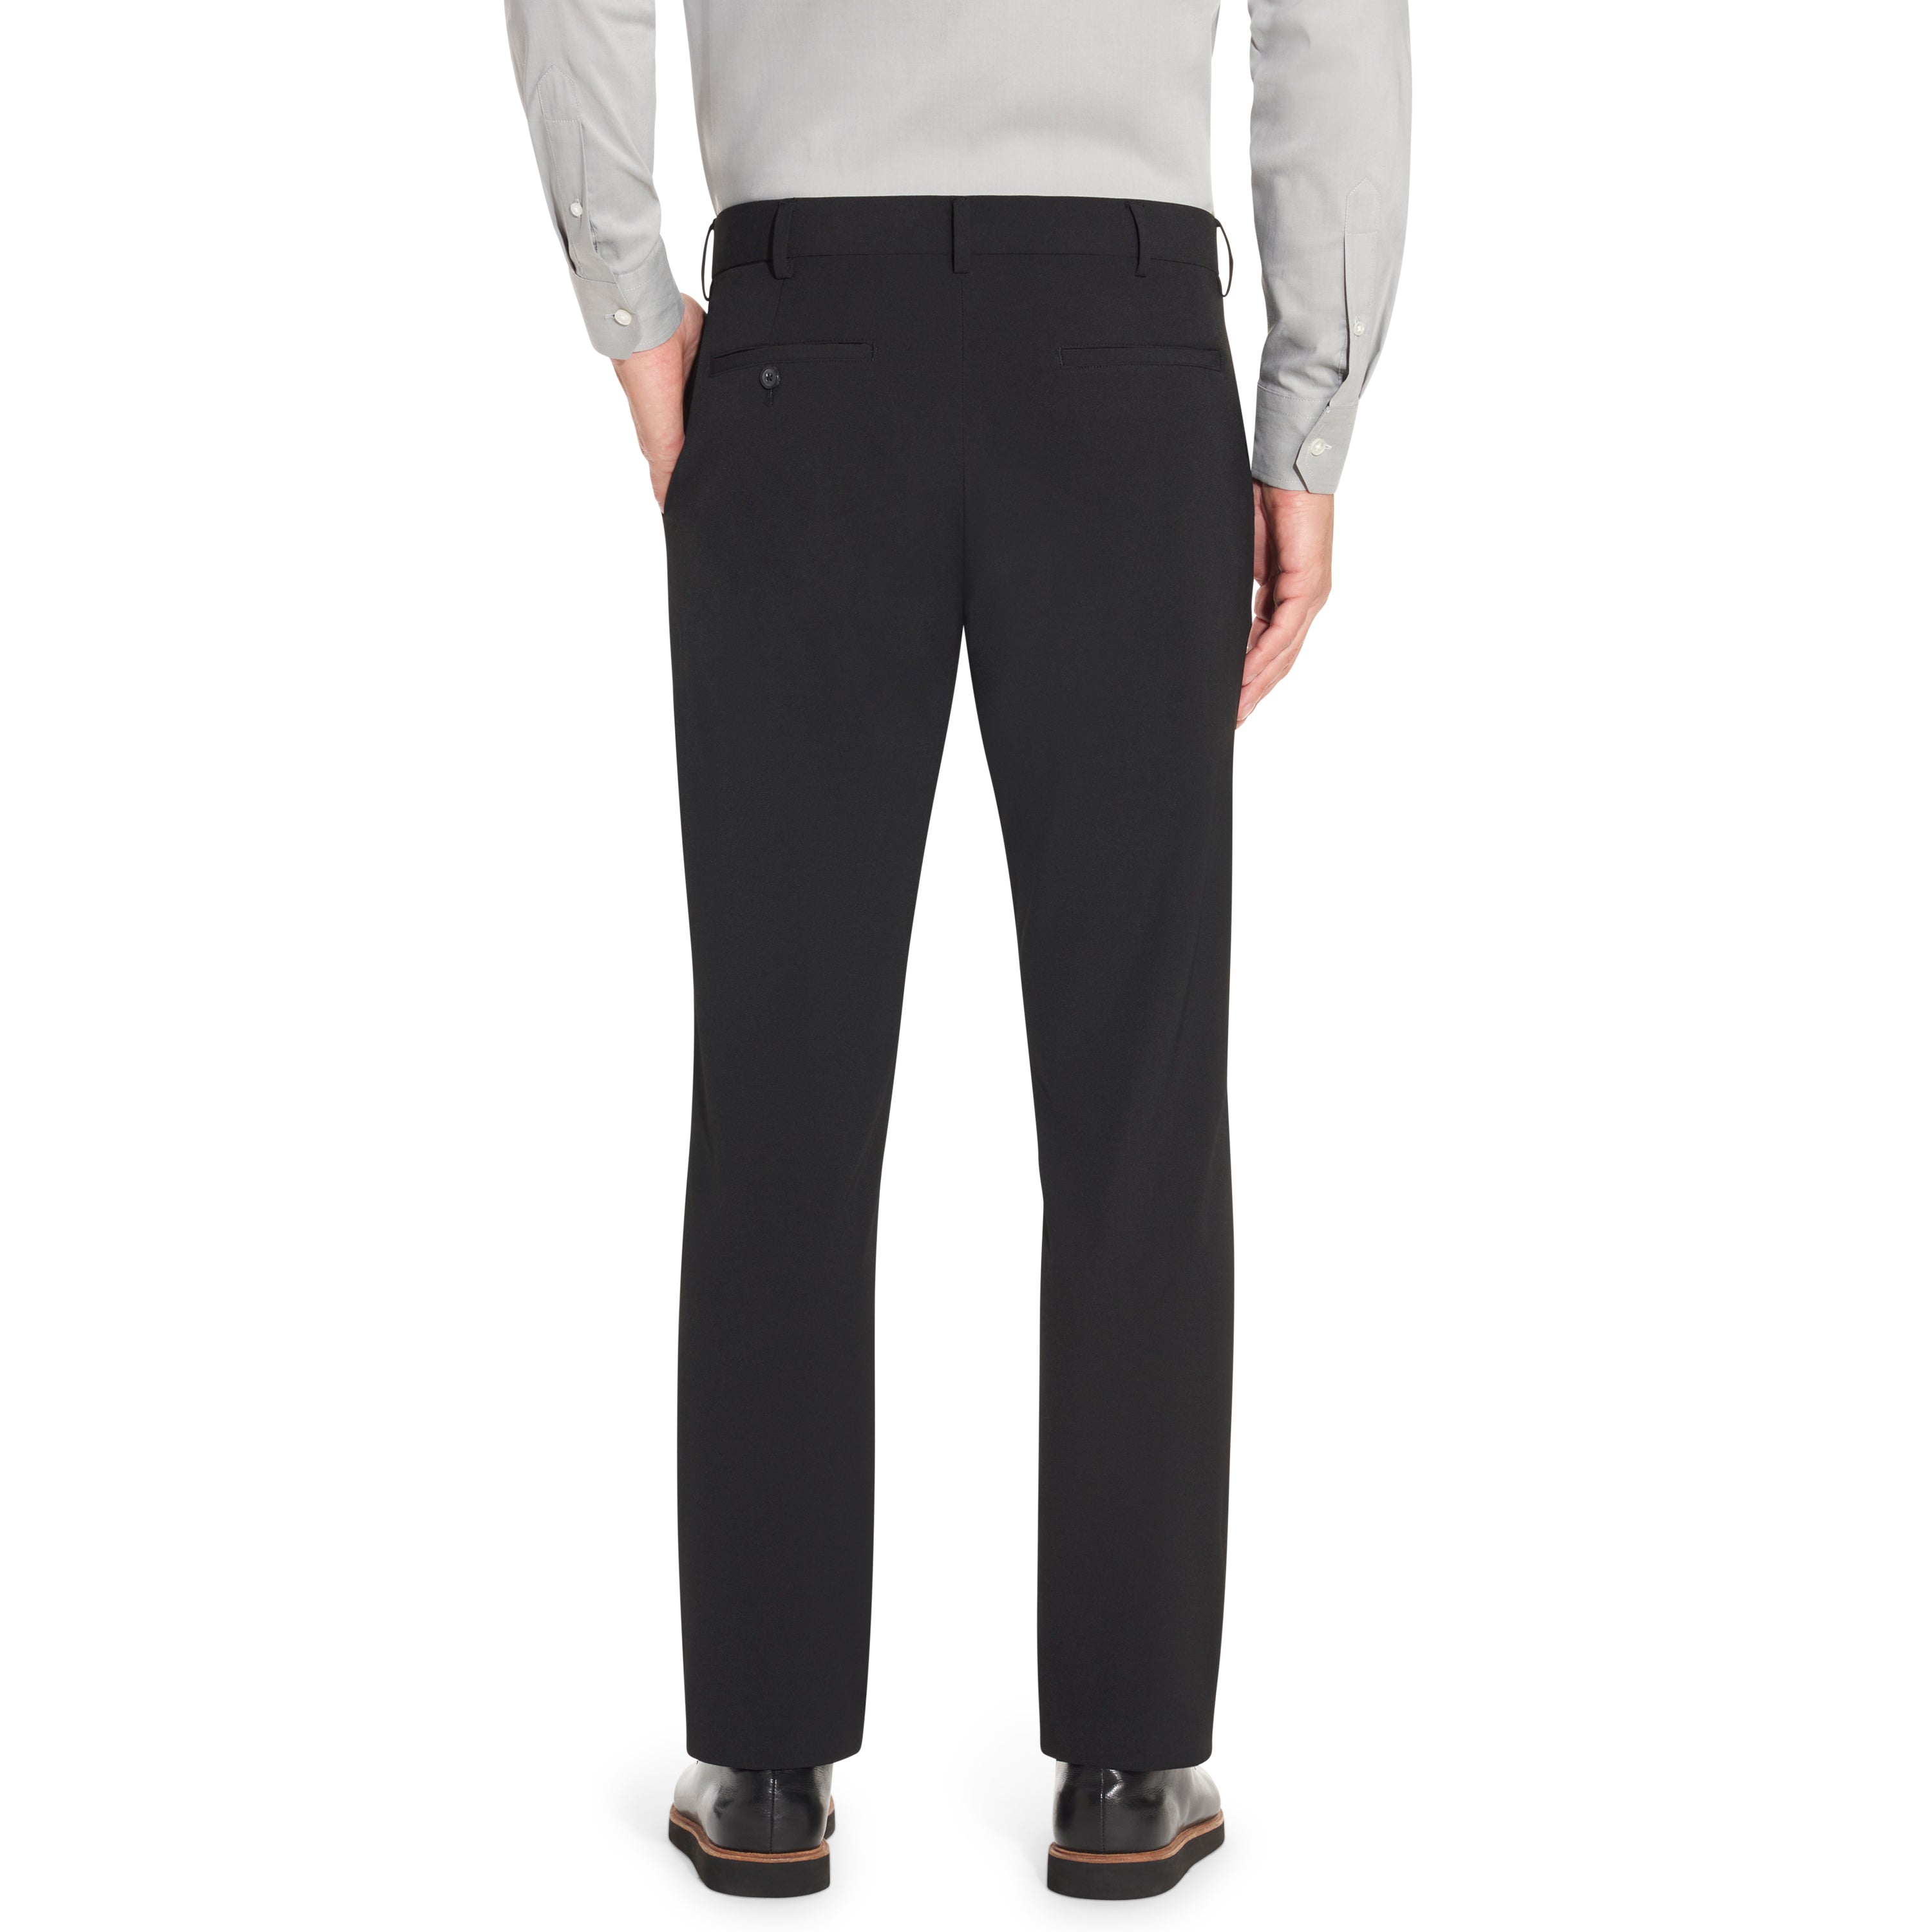 Stain Shield Flat Front Stretch Dress Pant - Slim Fit